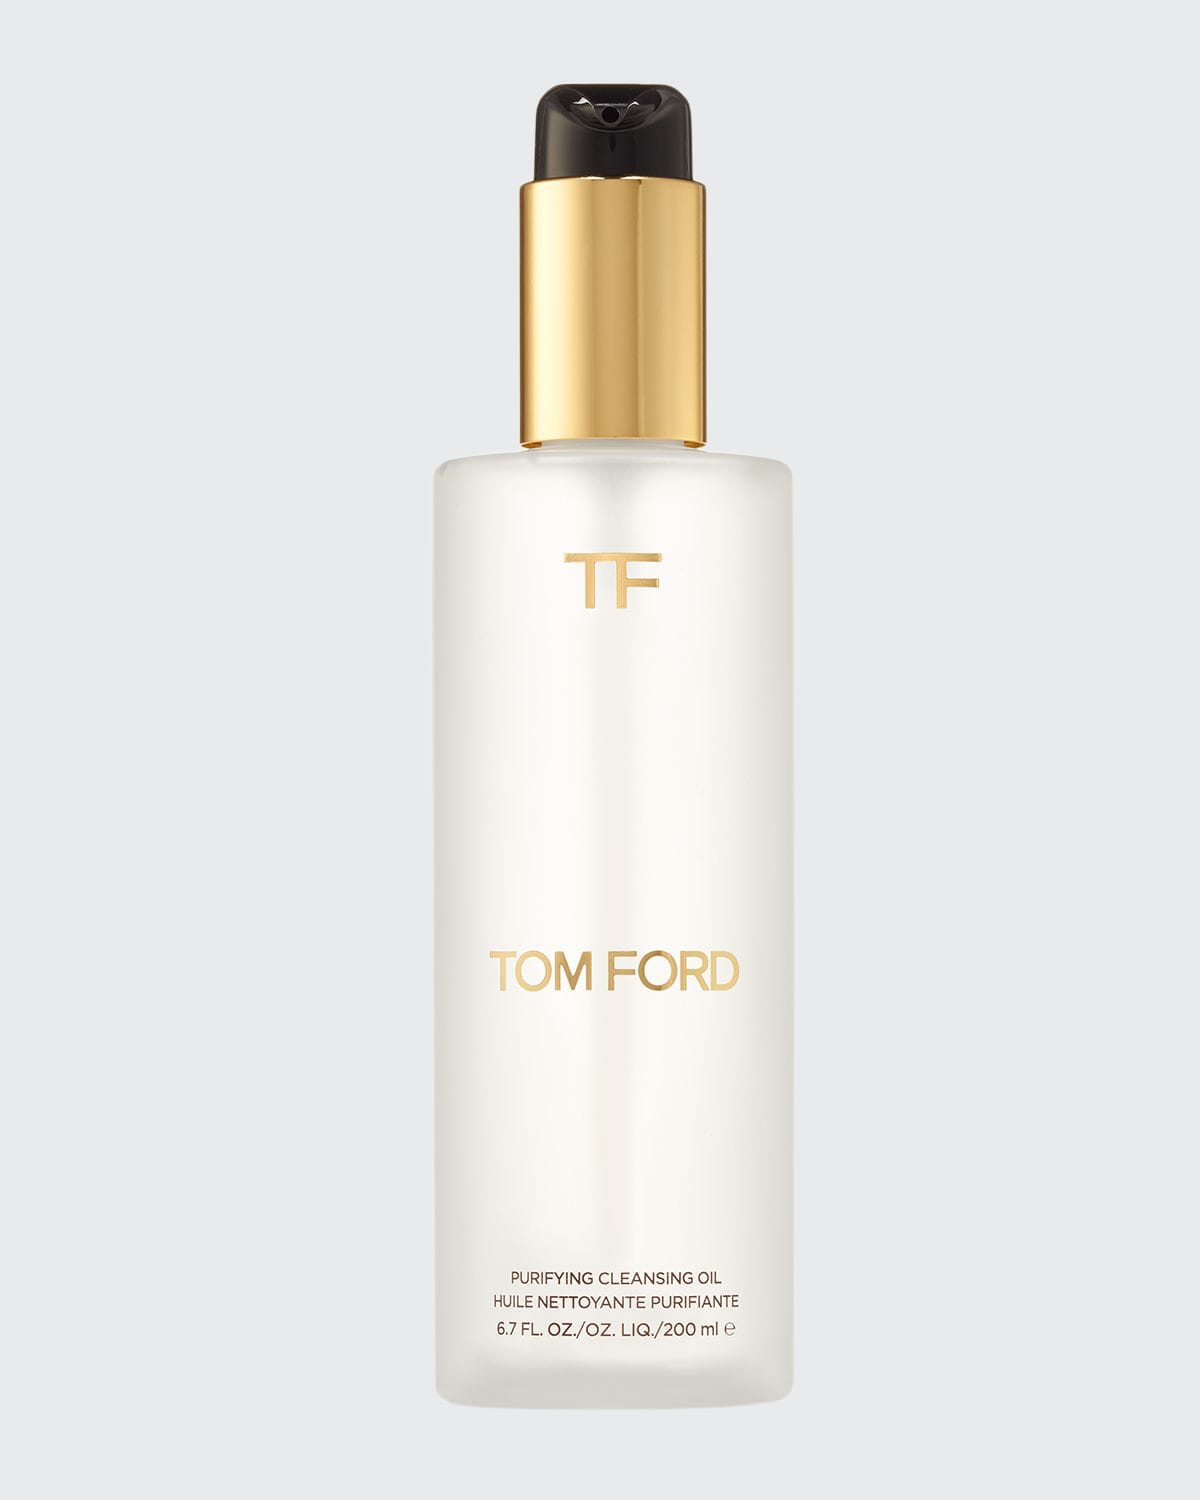 TOM FORD Purifying Cleansing Oil, 6.7 oz./ 200 mL